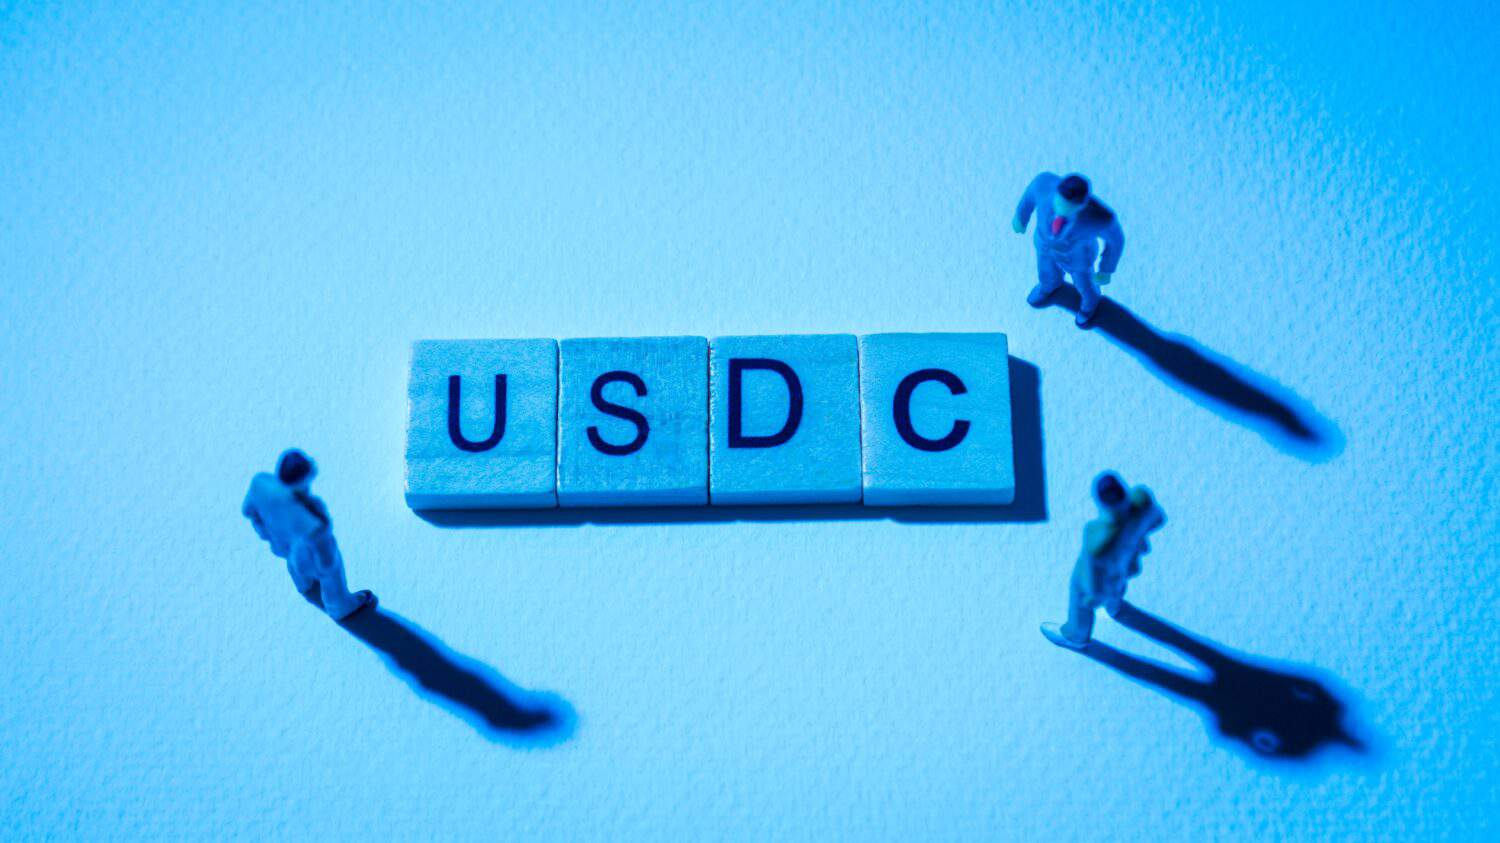 Miniature figures businessman : meeting on USDC word by wooden block words on white paper background in blue light, USDC or USD Coin in concept of digital money, cryptocurrency and business.